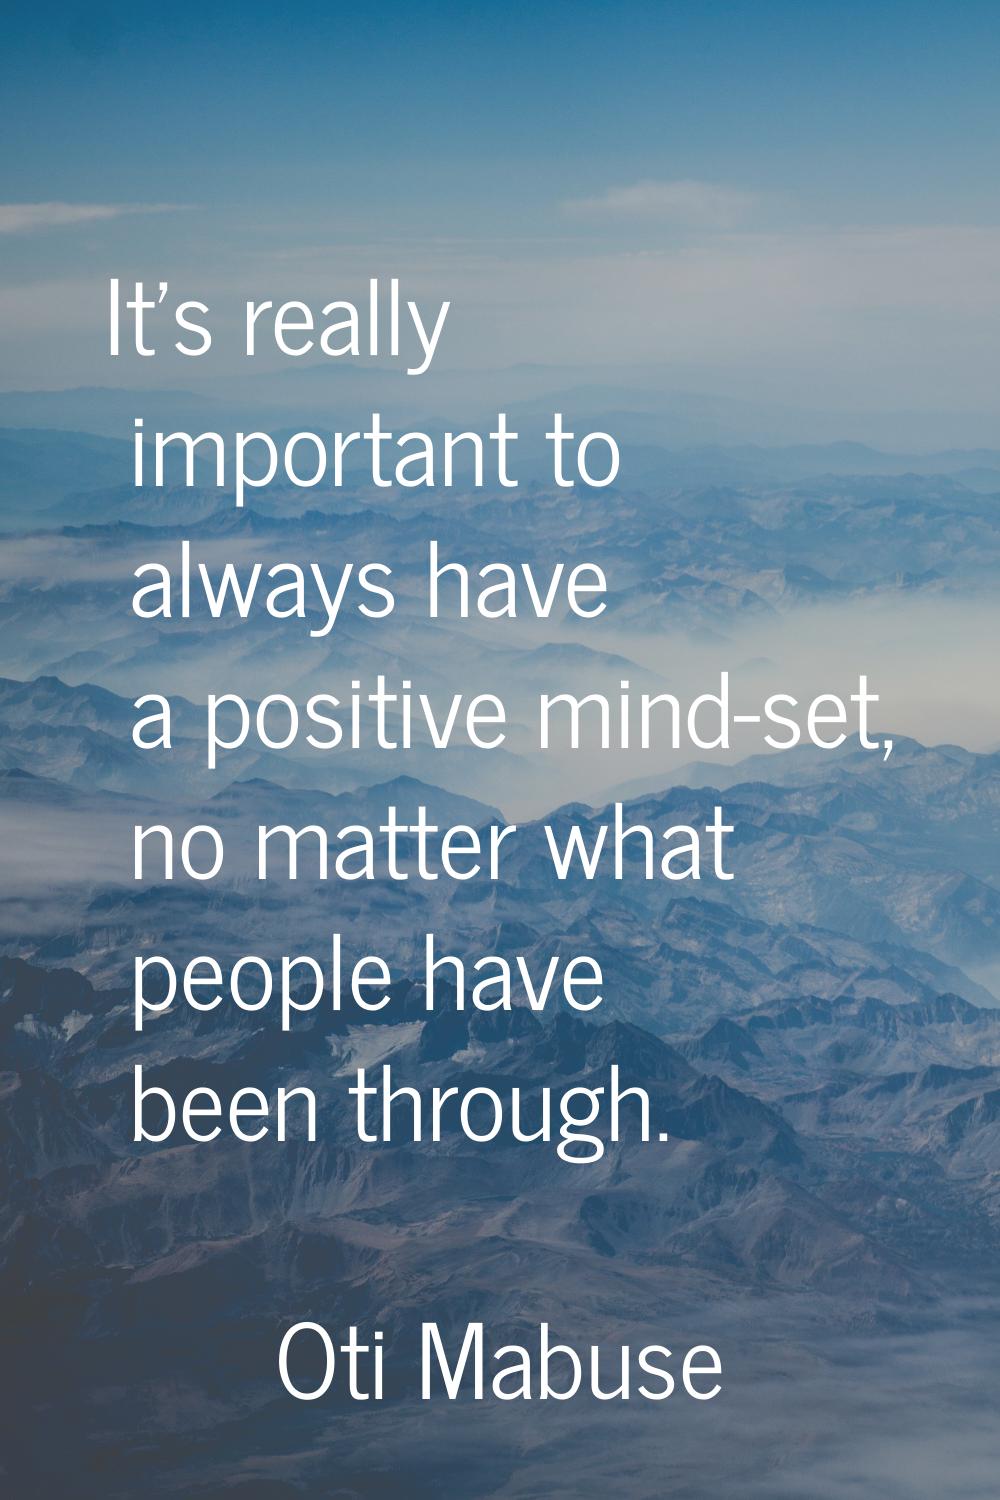 It's really important to always have a positive mind-set, no matter what people have been through.